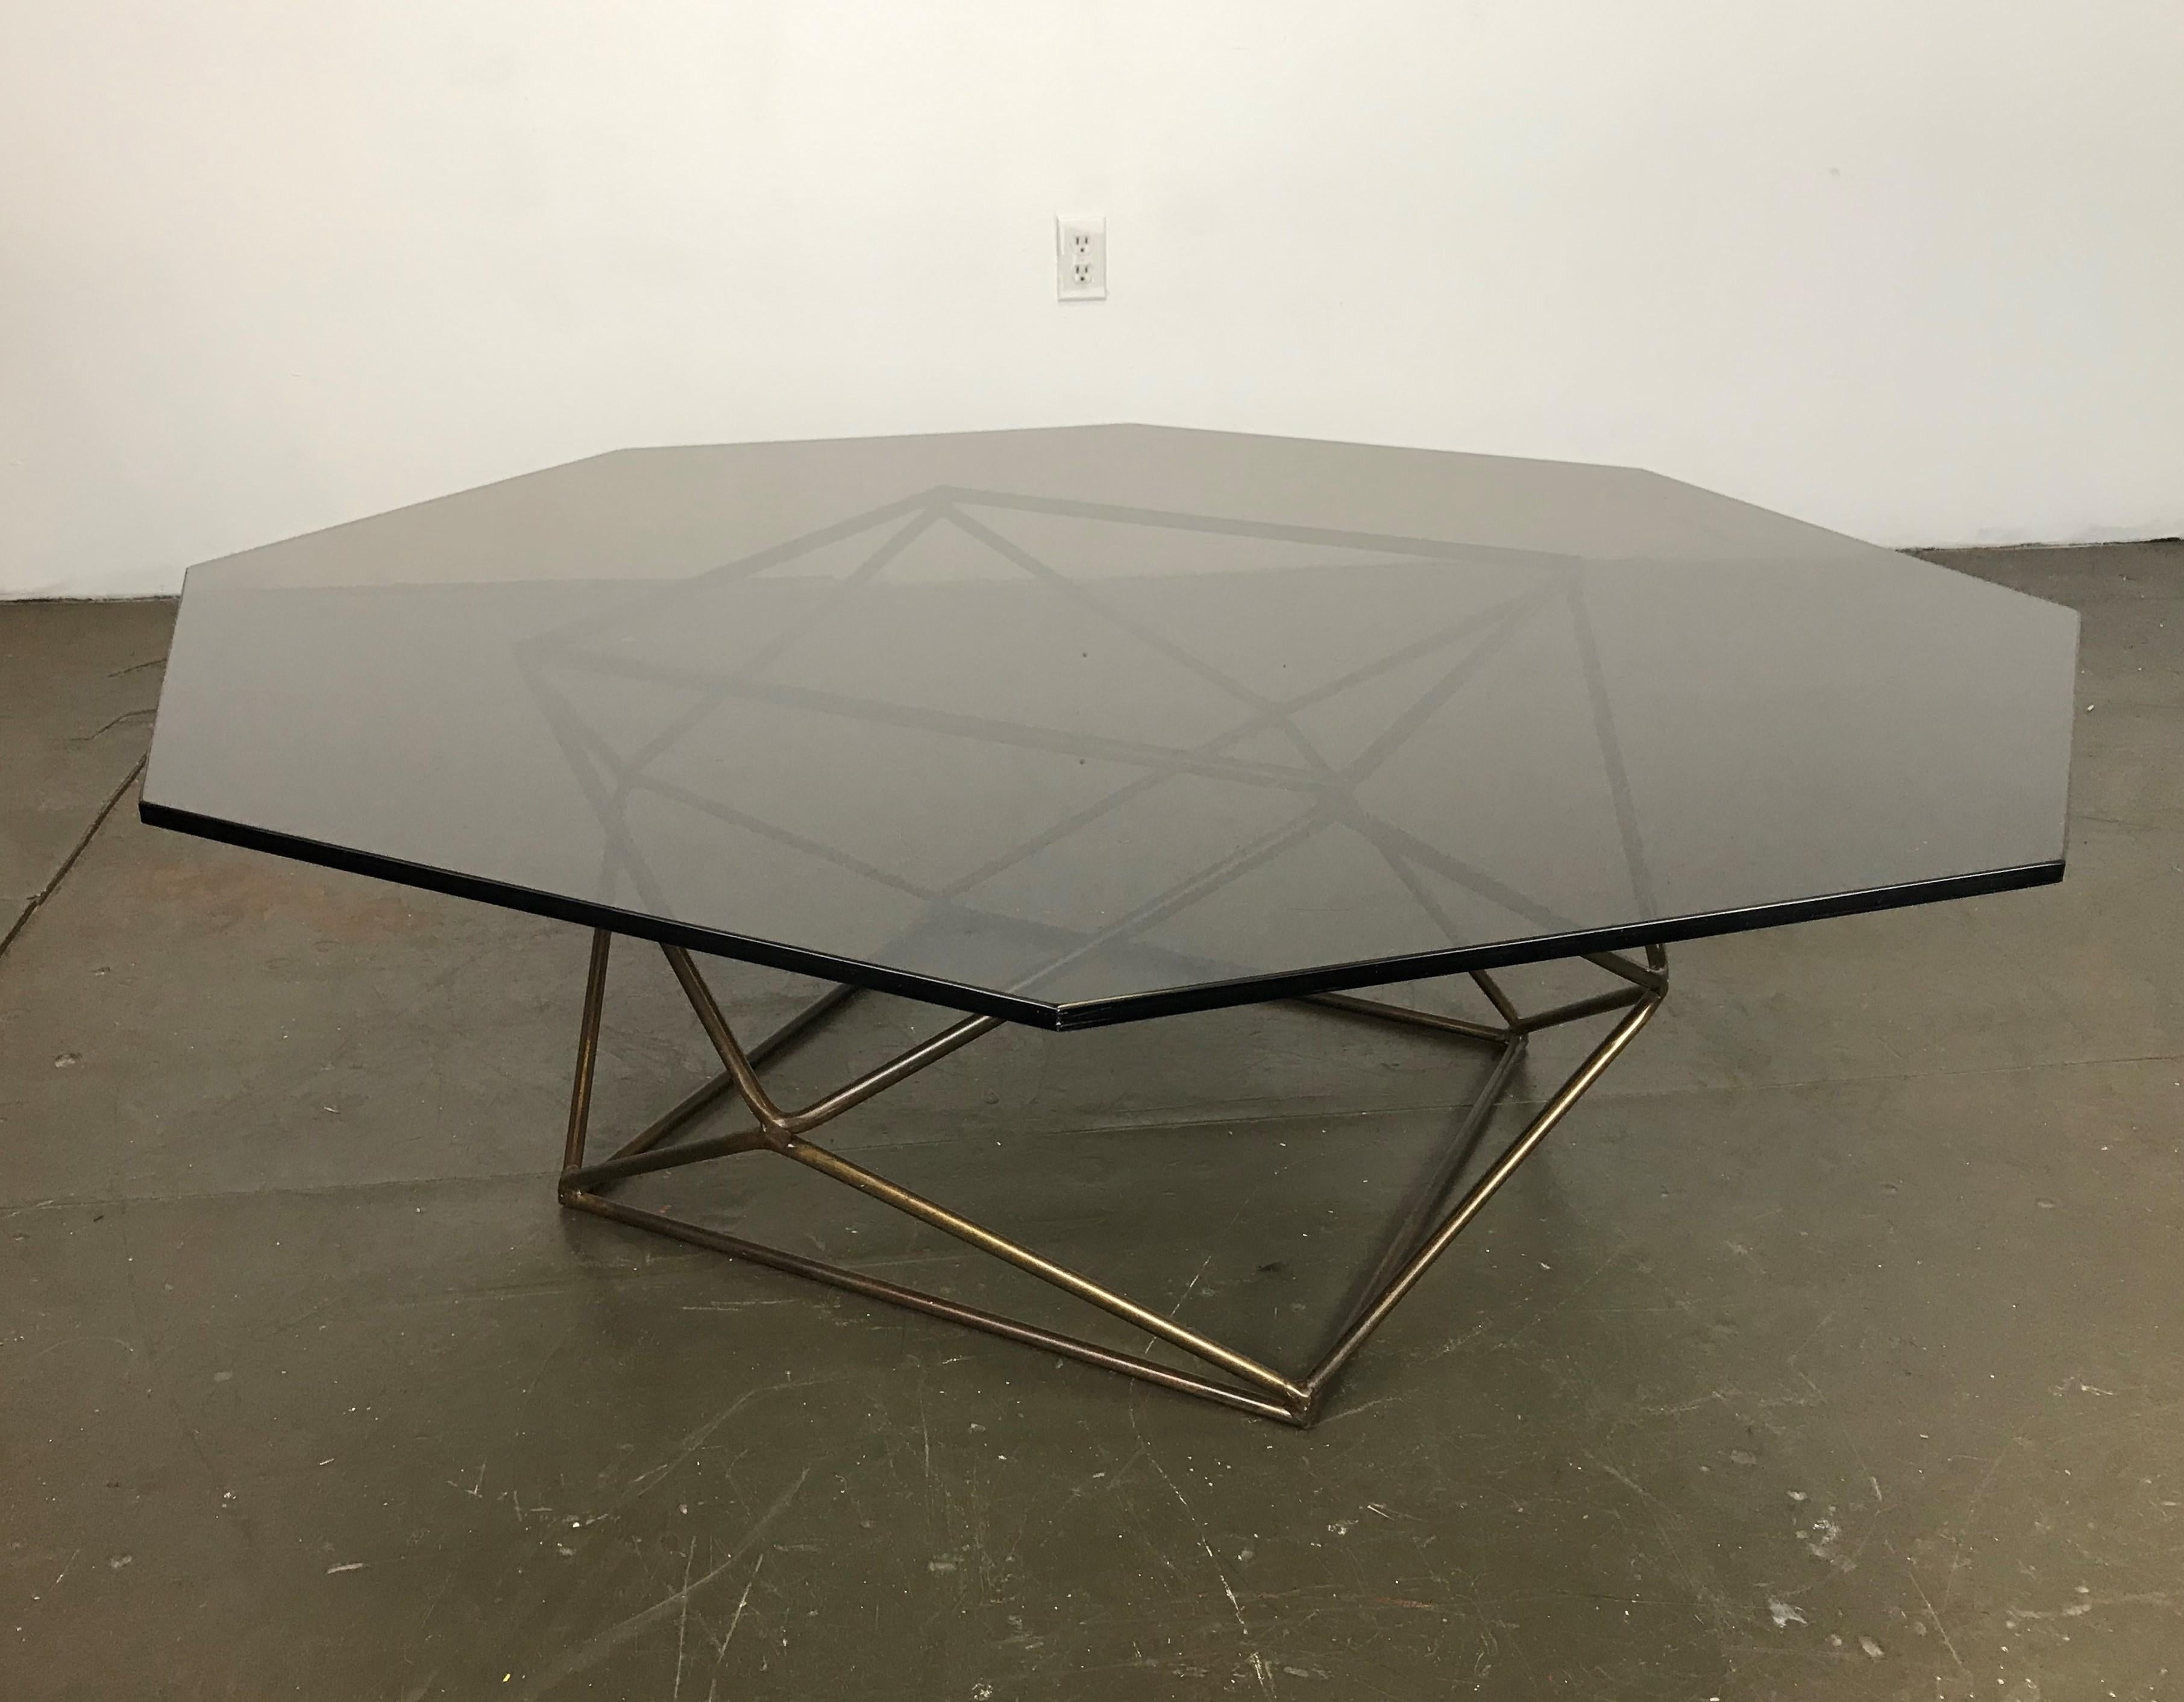 Excellent Minimalist Mid-Century Modern octagonal smoked glass coffee table with a 18 sided polygon bronzed finish over metal base. Designed in the early 1970s by Milo Baughman for Directional. 

The base is in nice shape with patina. The top -